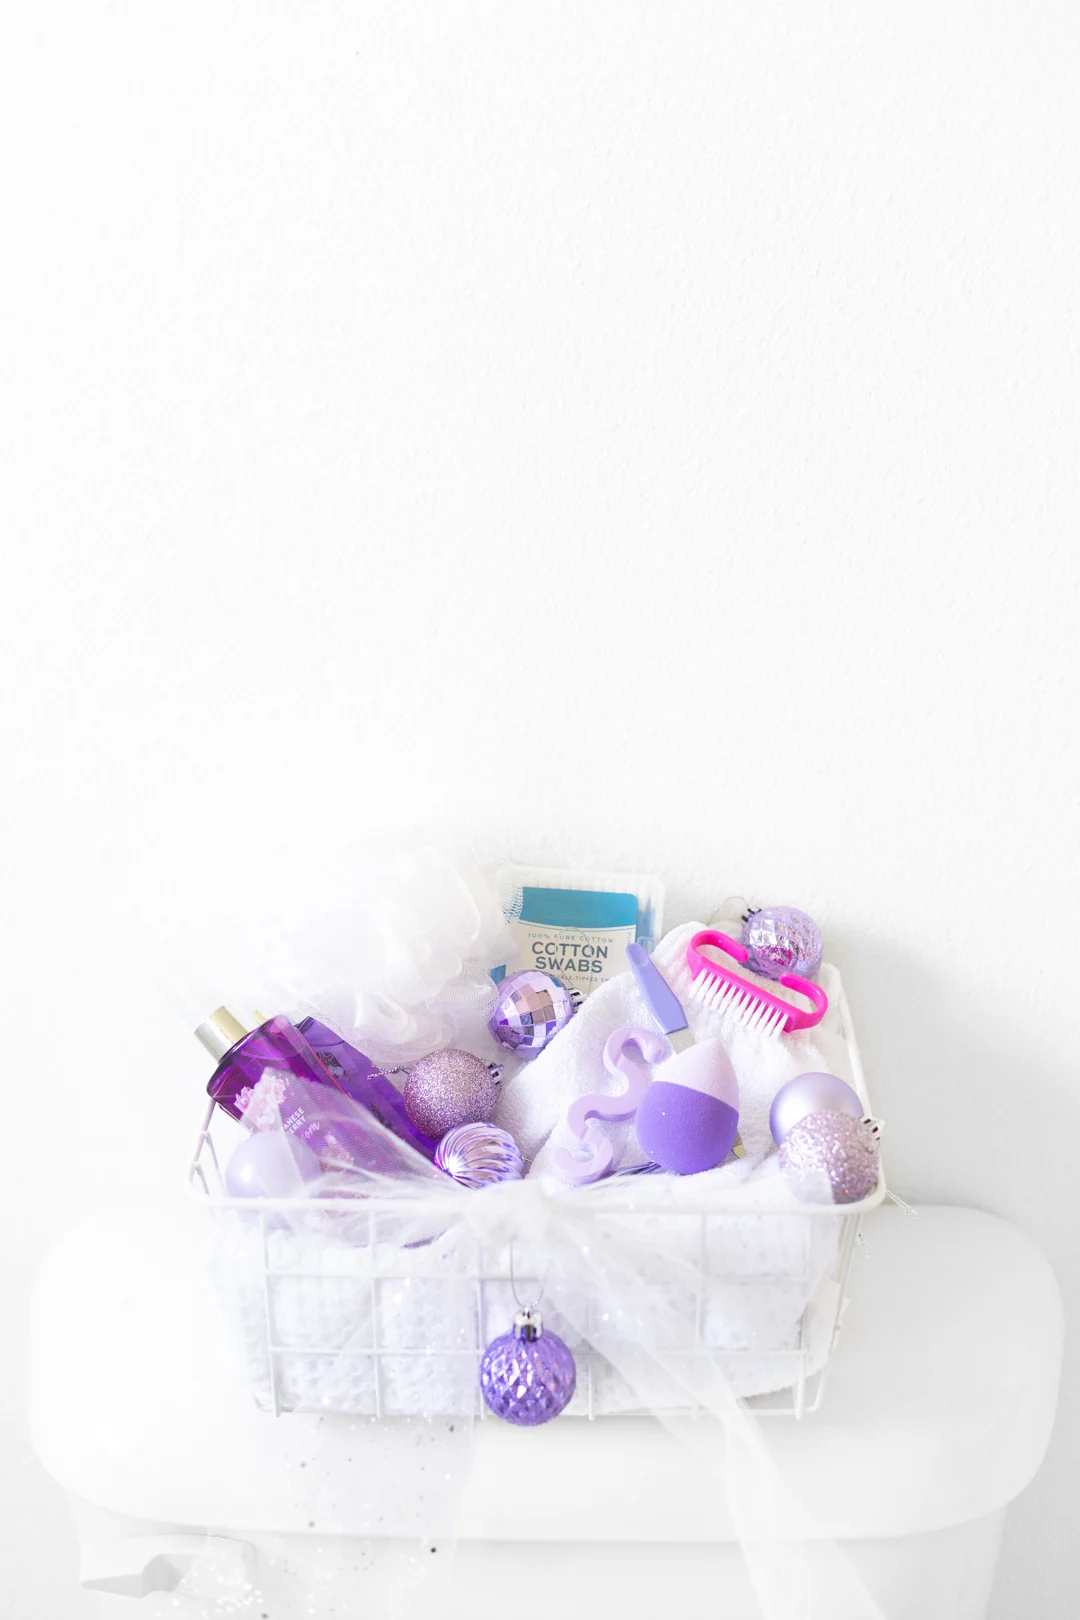 bathroom toiletry basket for guests over the holidays